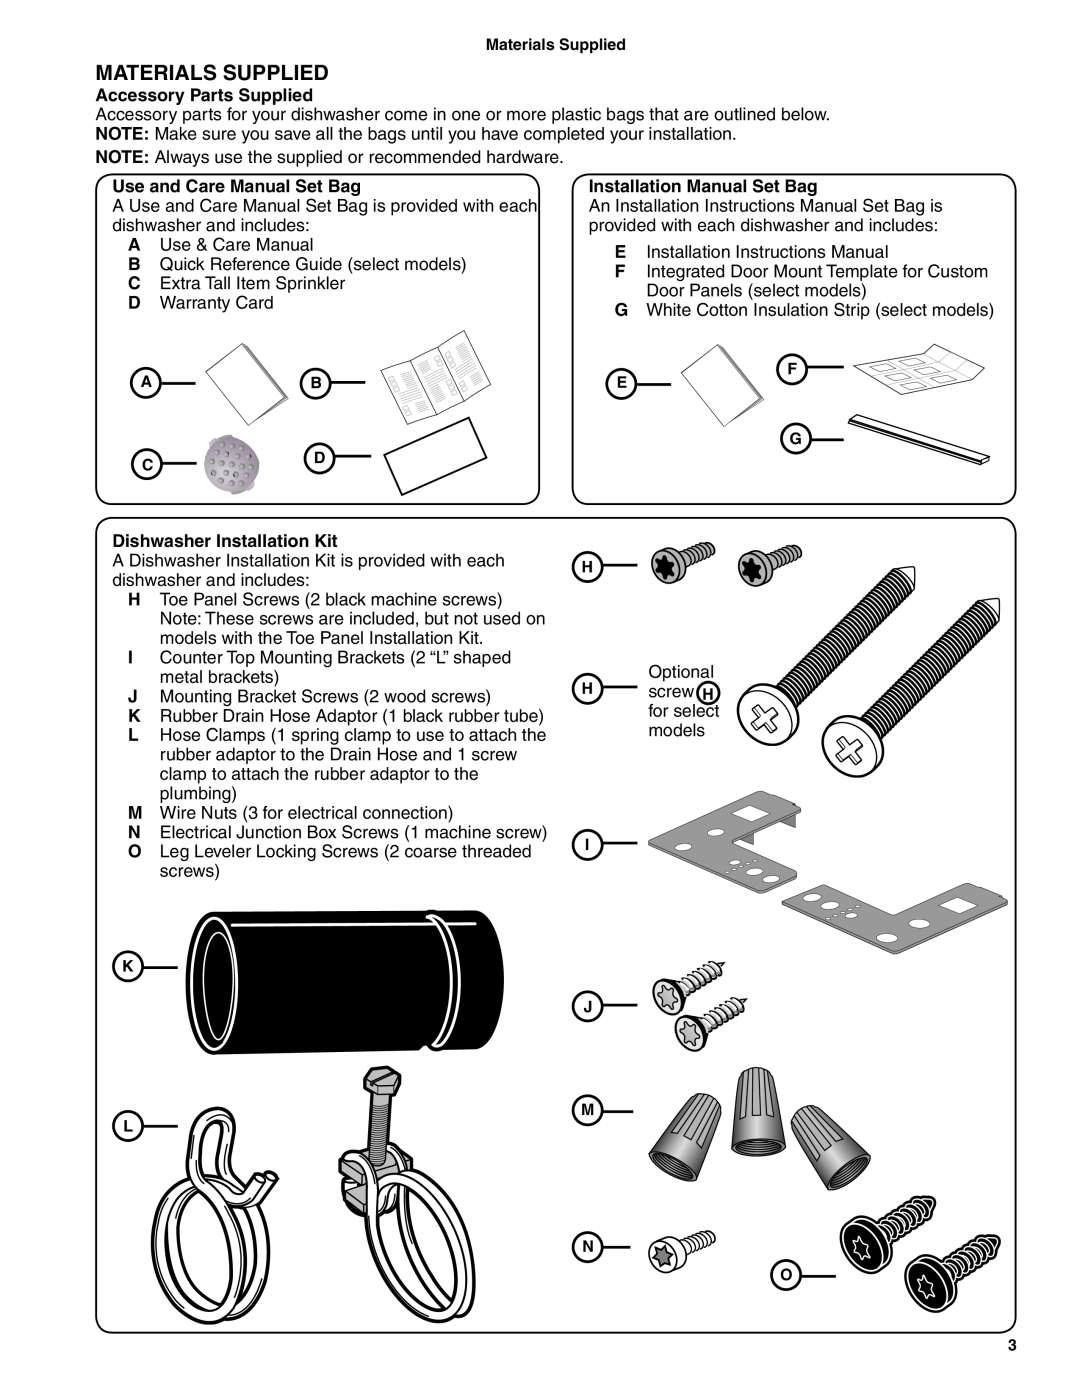 Bosch Appliances BSH Dishwasher Materials Supplied, Accessory Parts Supplied, Use and Care Manual Set Bag 